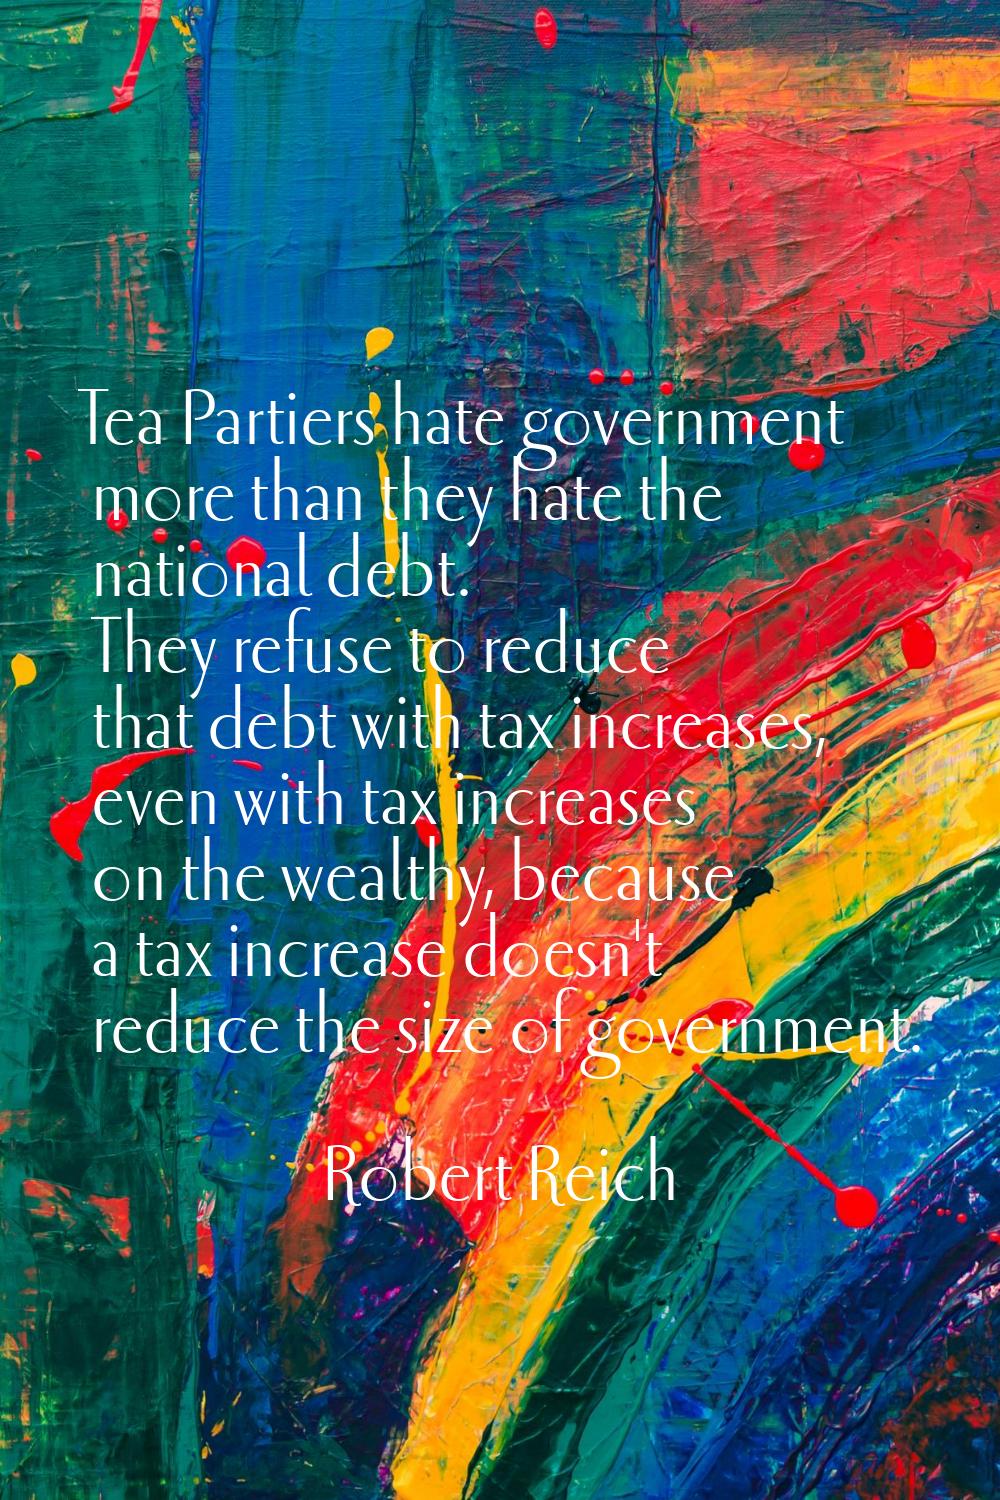 Tea Partiers hate government more than they hate the national debt. They refuse to reduce that debt